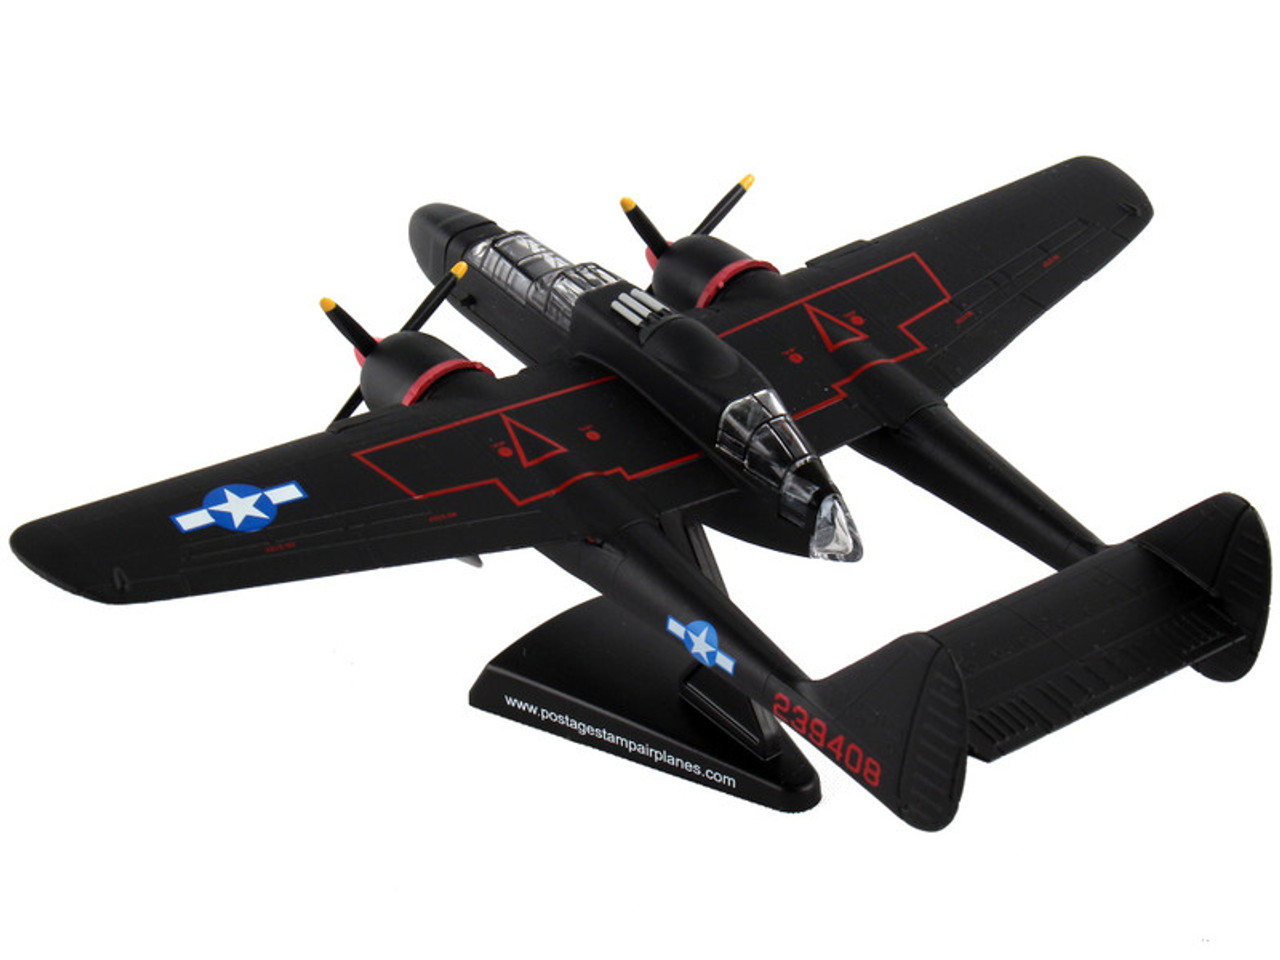 Northrup P-61 Black Widow Fighter Aircraft "Lady in the Dark 548th Night Fighter Squadron" United States Army Air Forces 1/120 Diecast Model Airplane by Postage Stamp